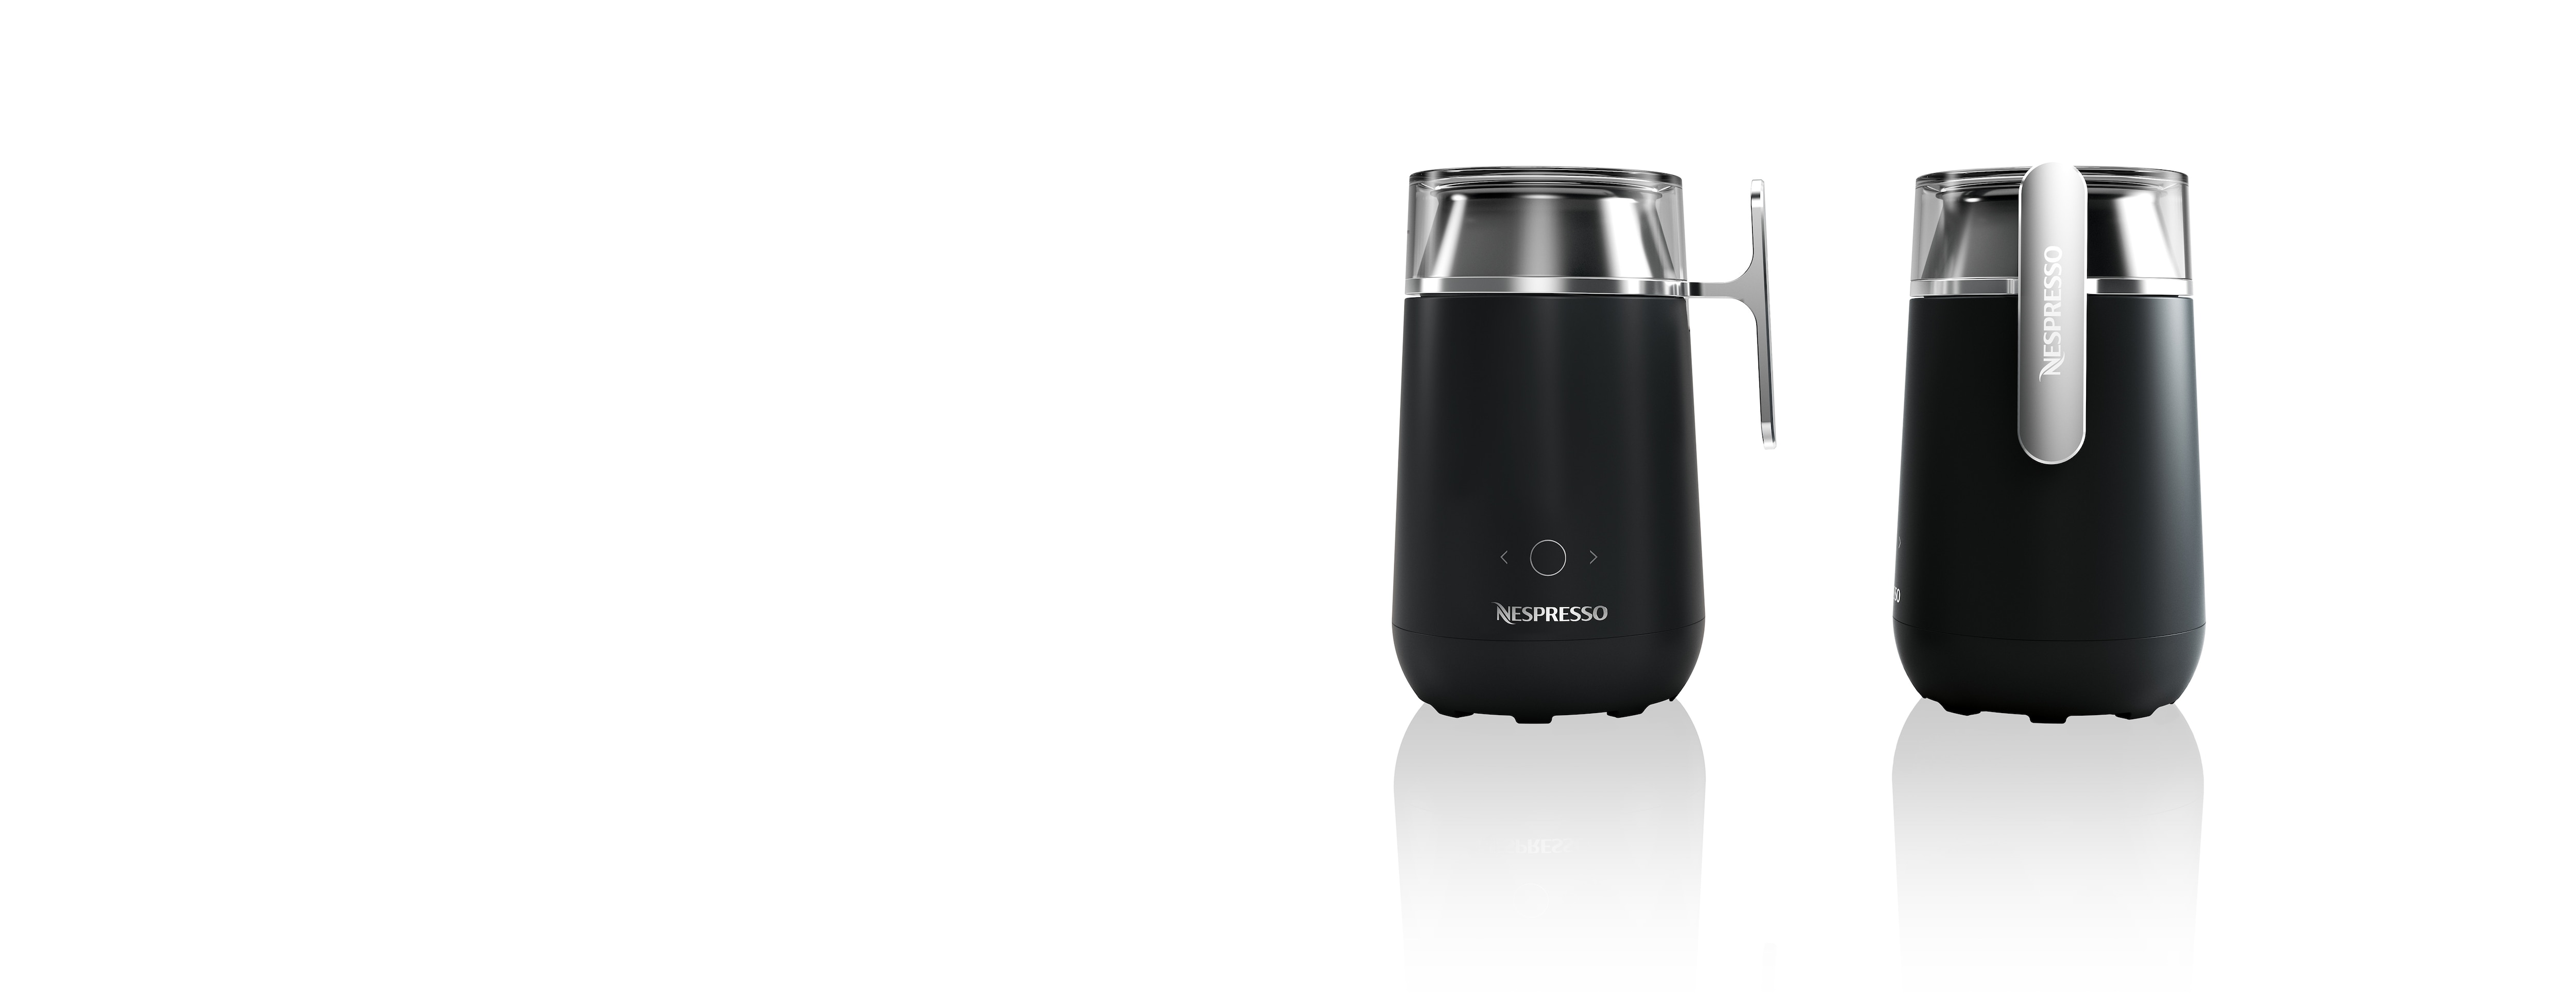 Nespresso Barista Milk Frother Review: Cafe Coffee Drinks at Home